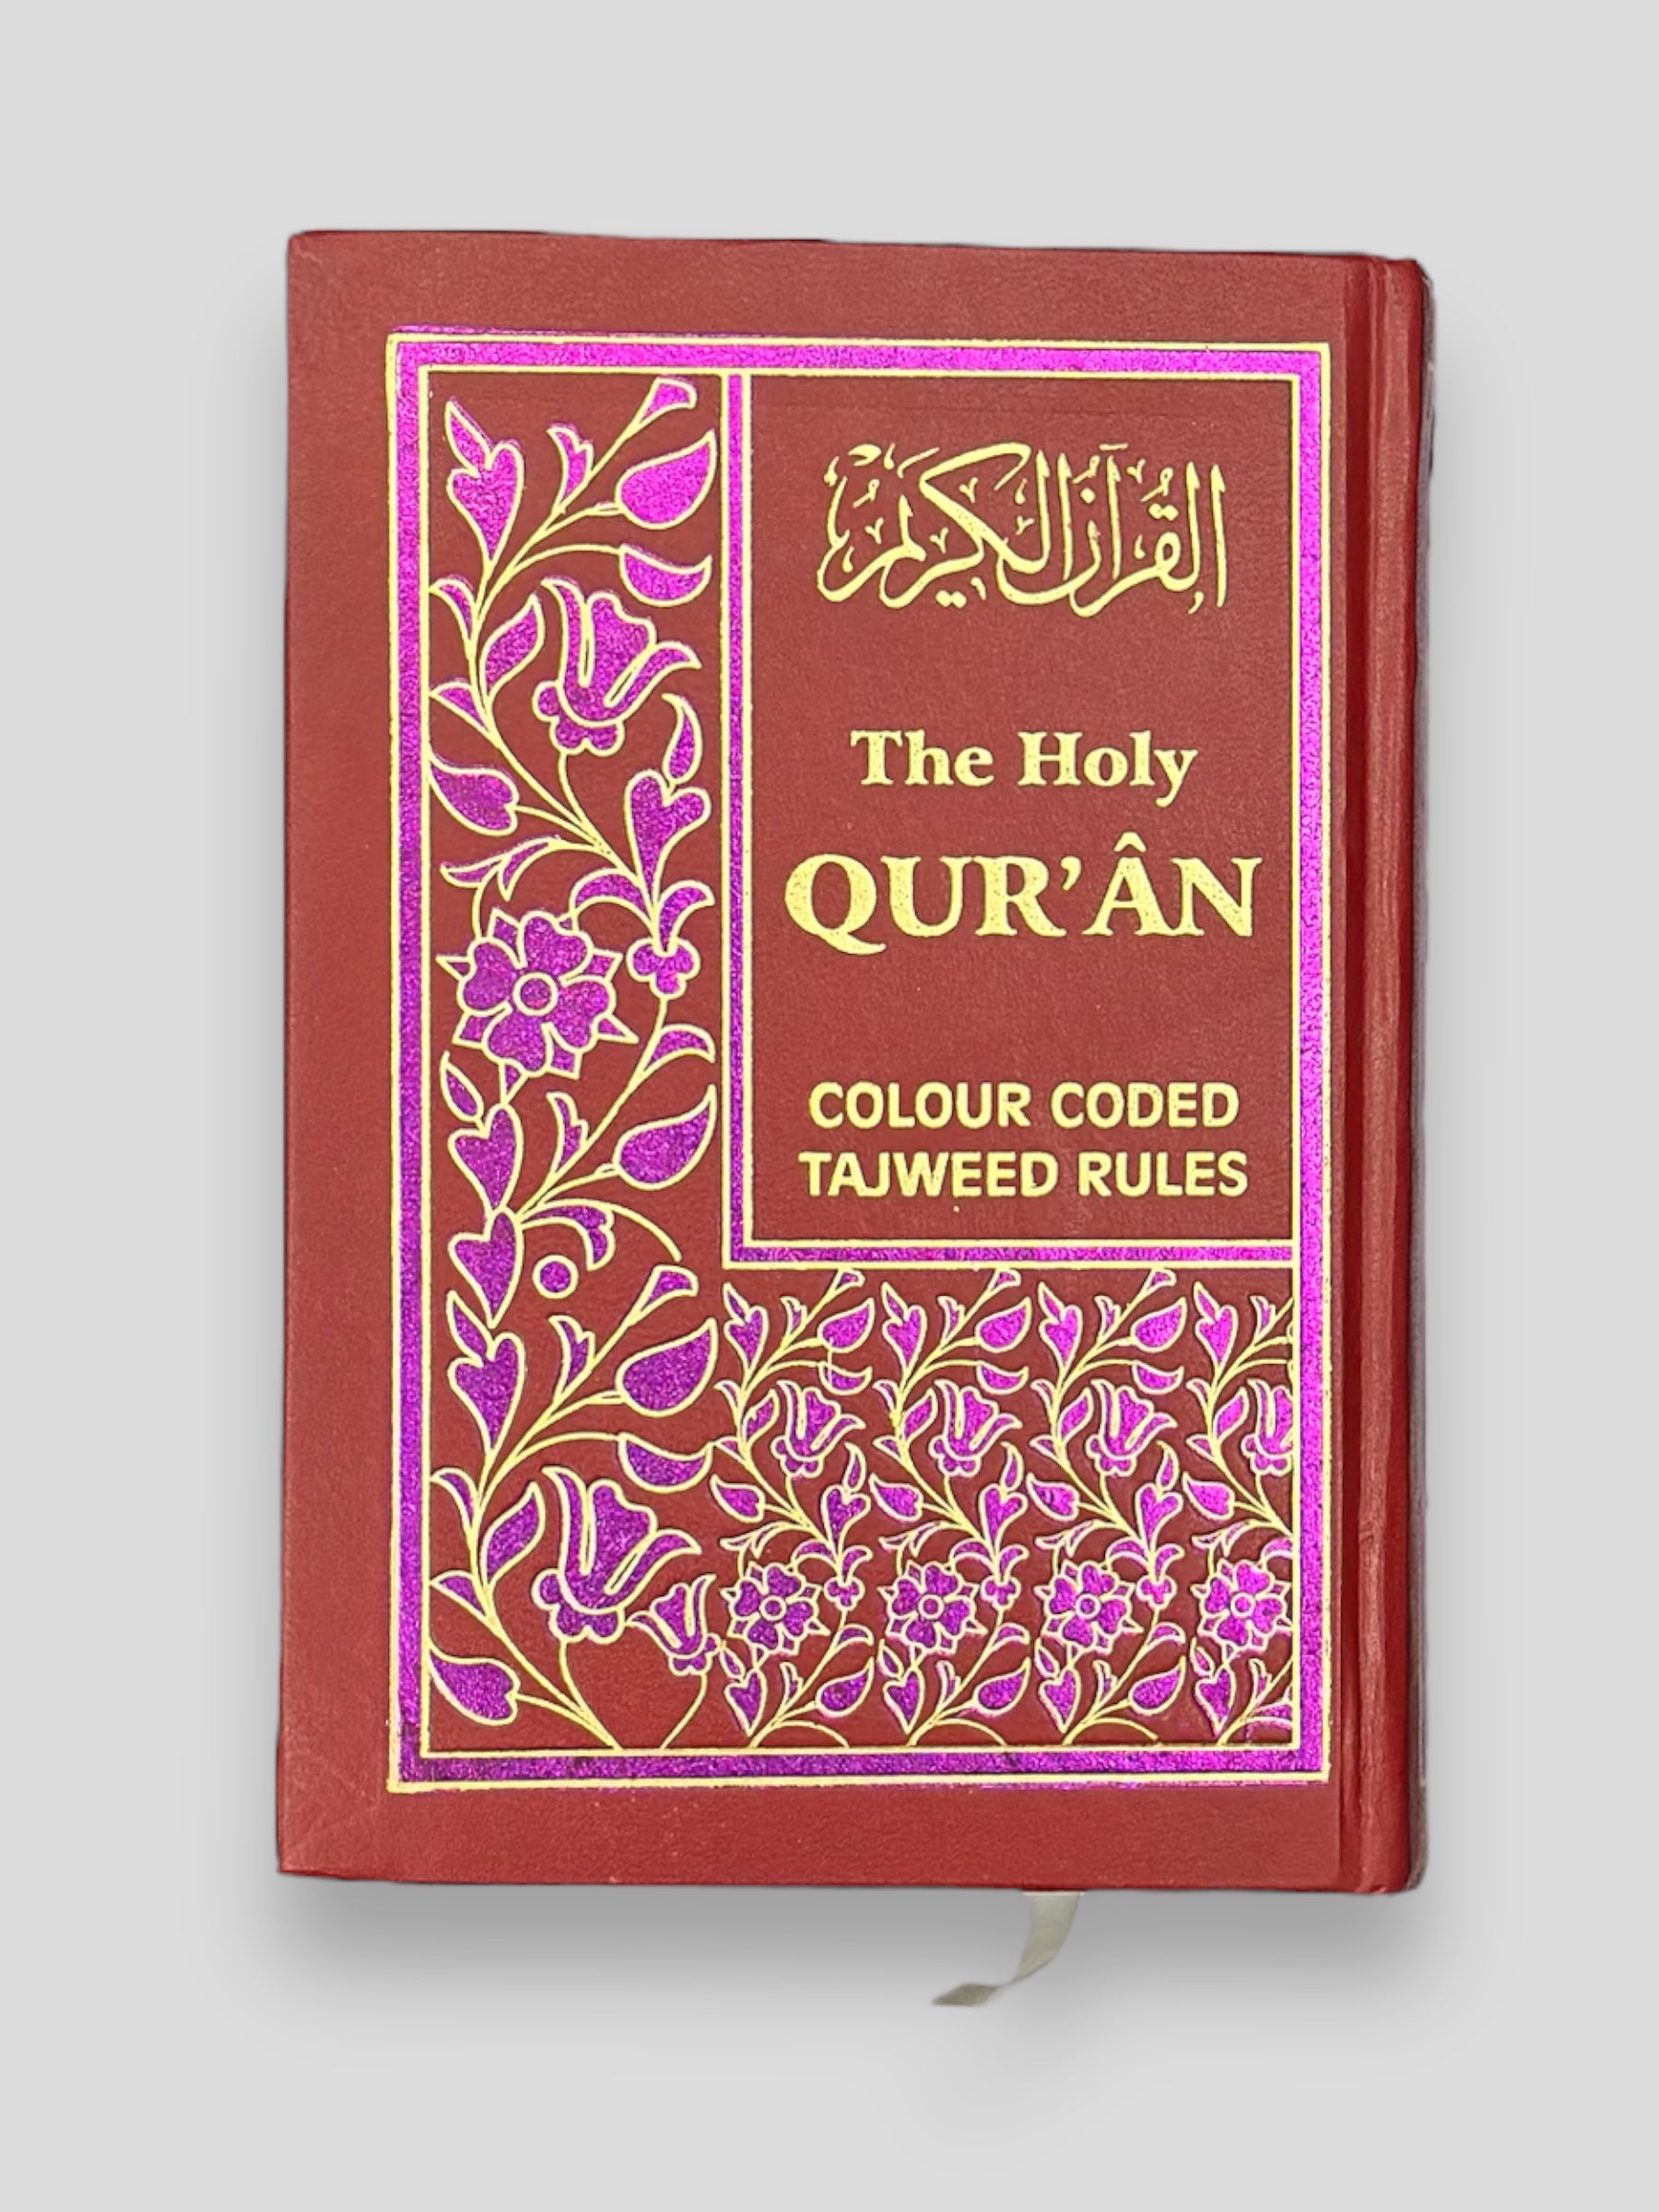 The Holy Quran Colour Coded Tajweed Rules